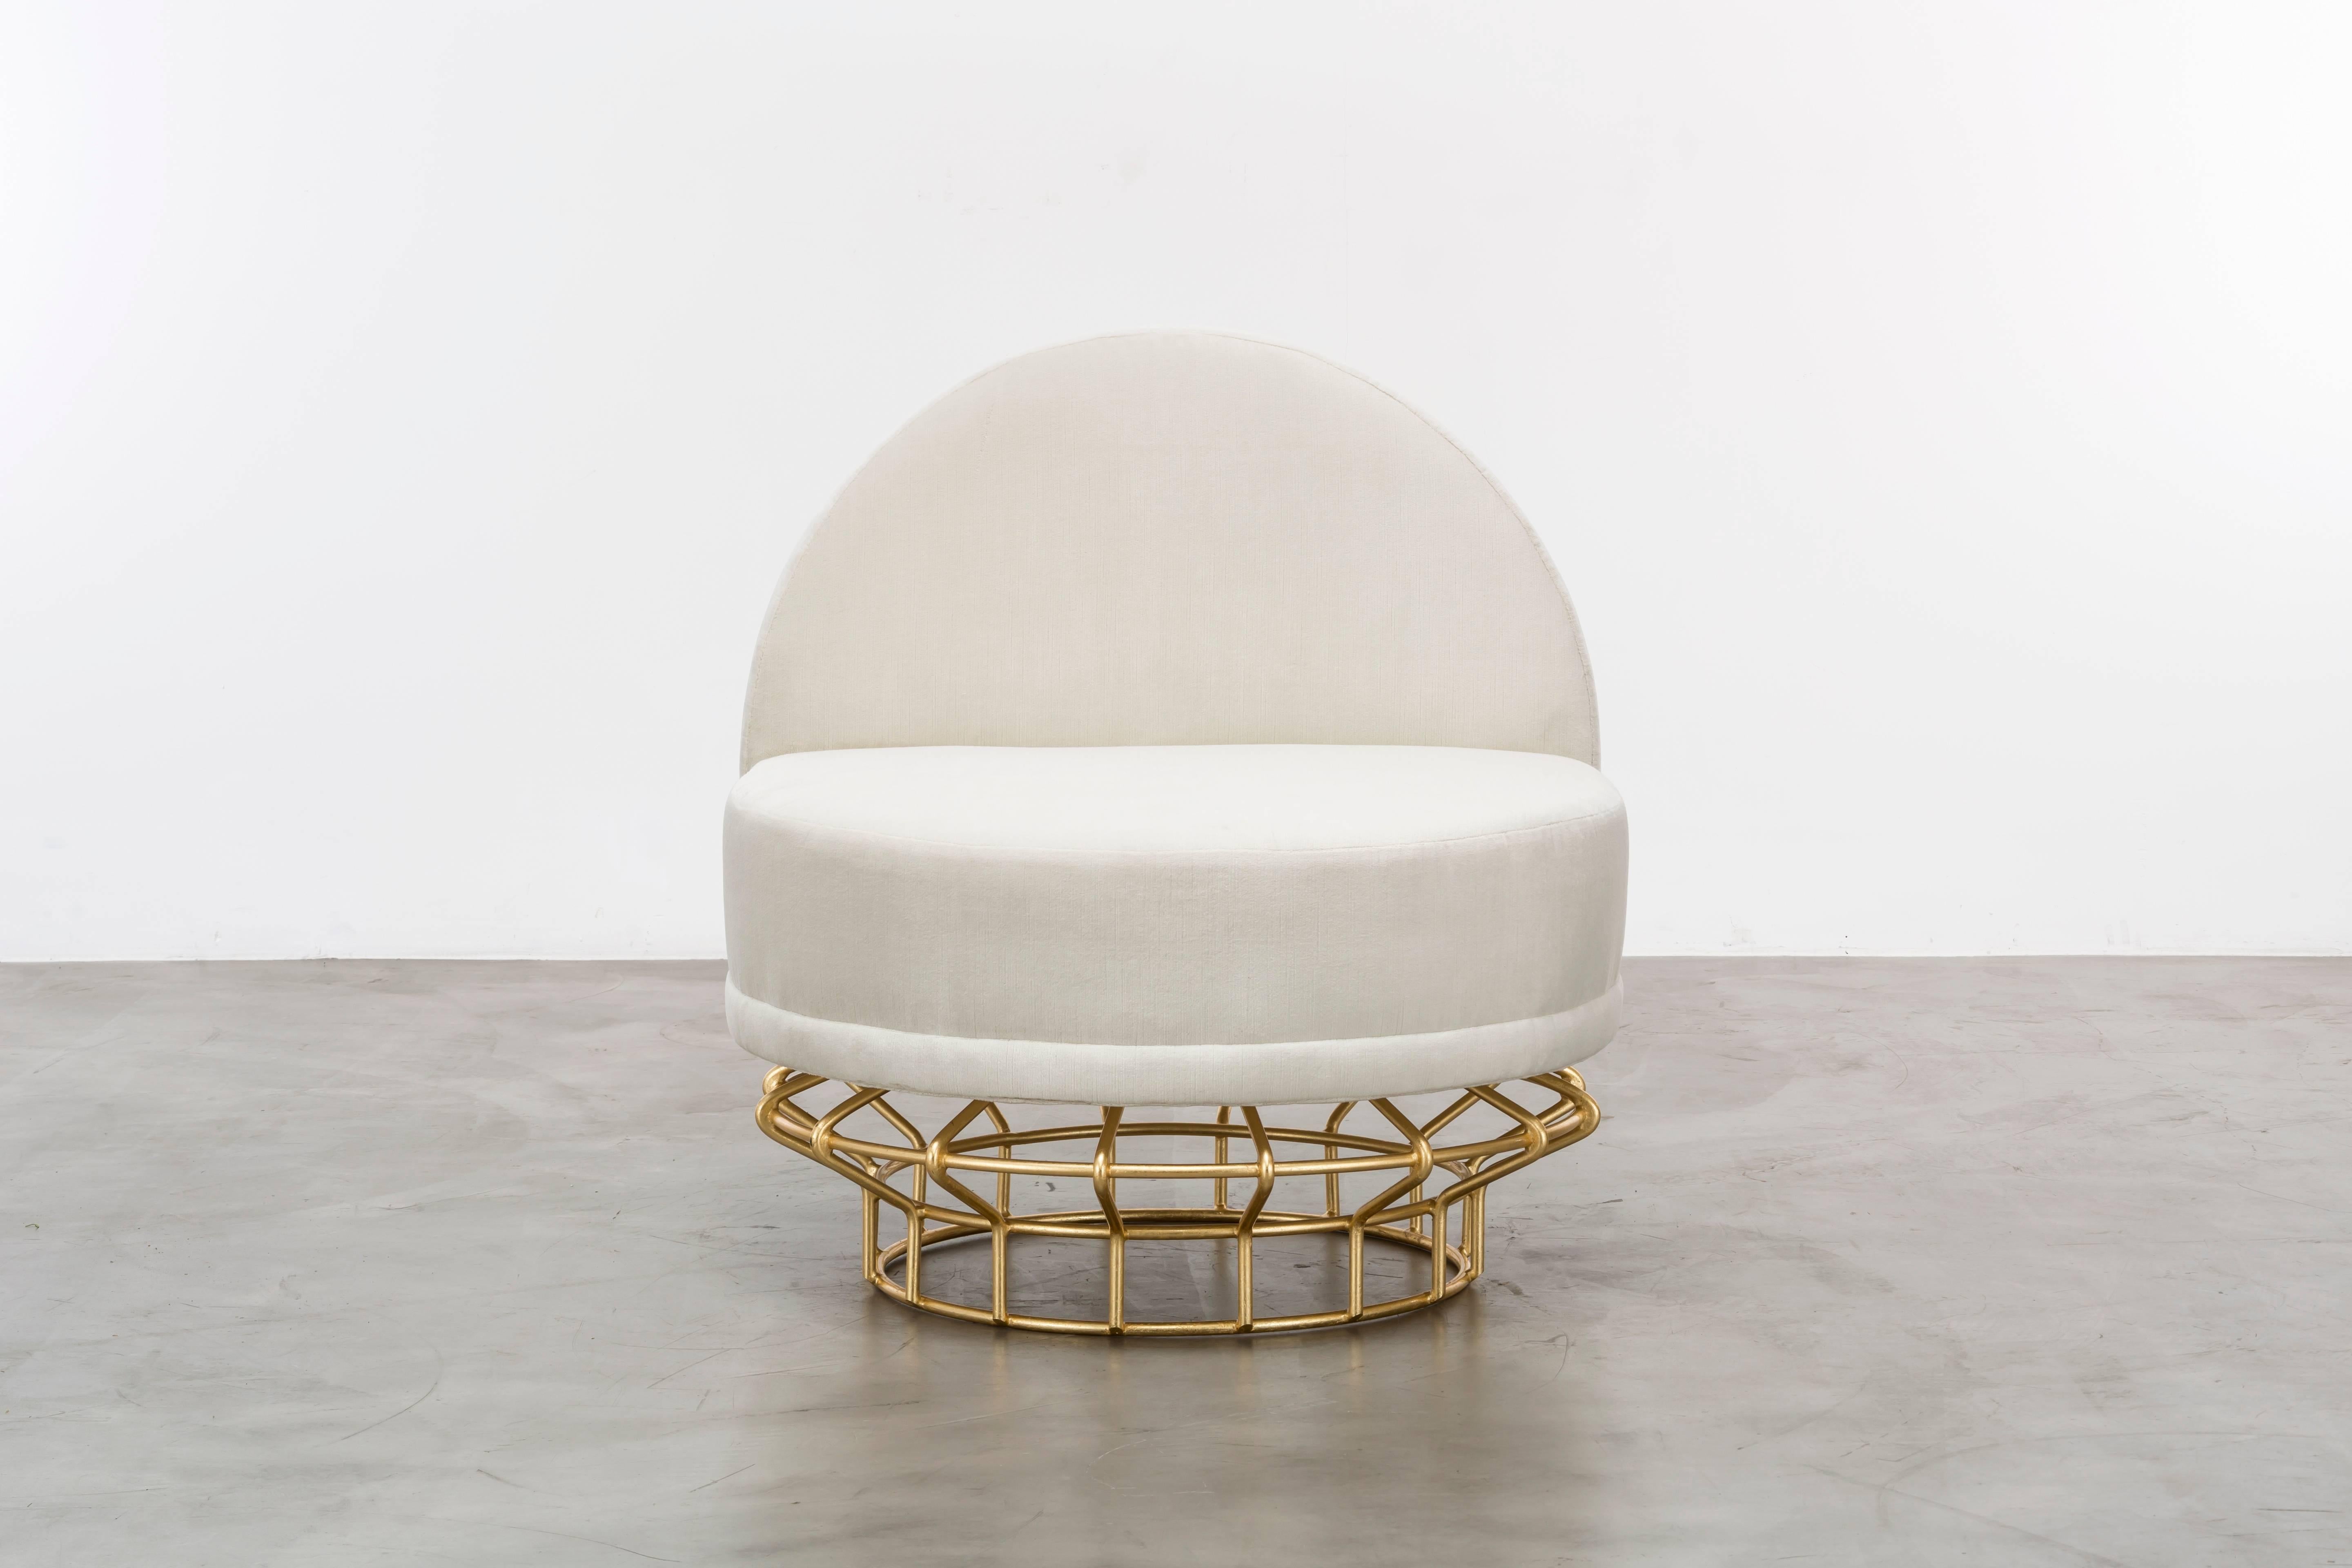 HALSTON CHAIR - Modern Ivory Velvet Chair with a Gold Leaf over Iron Base

The Halston Chair is a beautiful piece of furniture that features a tightly upholstered seat and back, which is elevated by a gold leaf over an iron base. This chair exudes